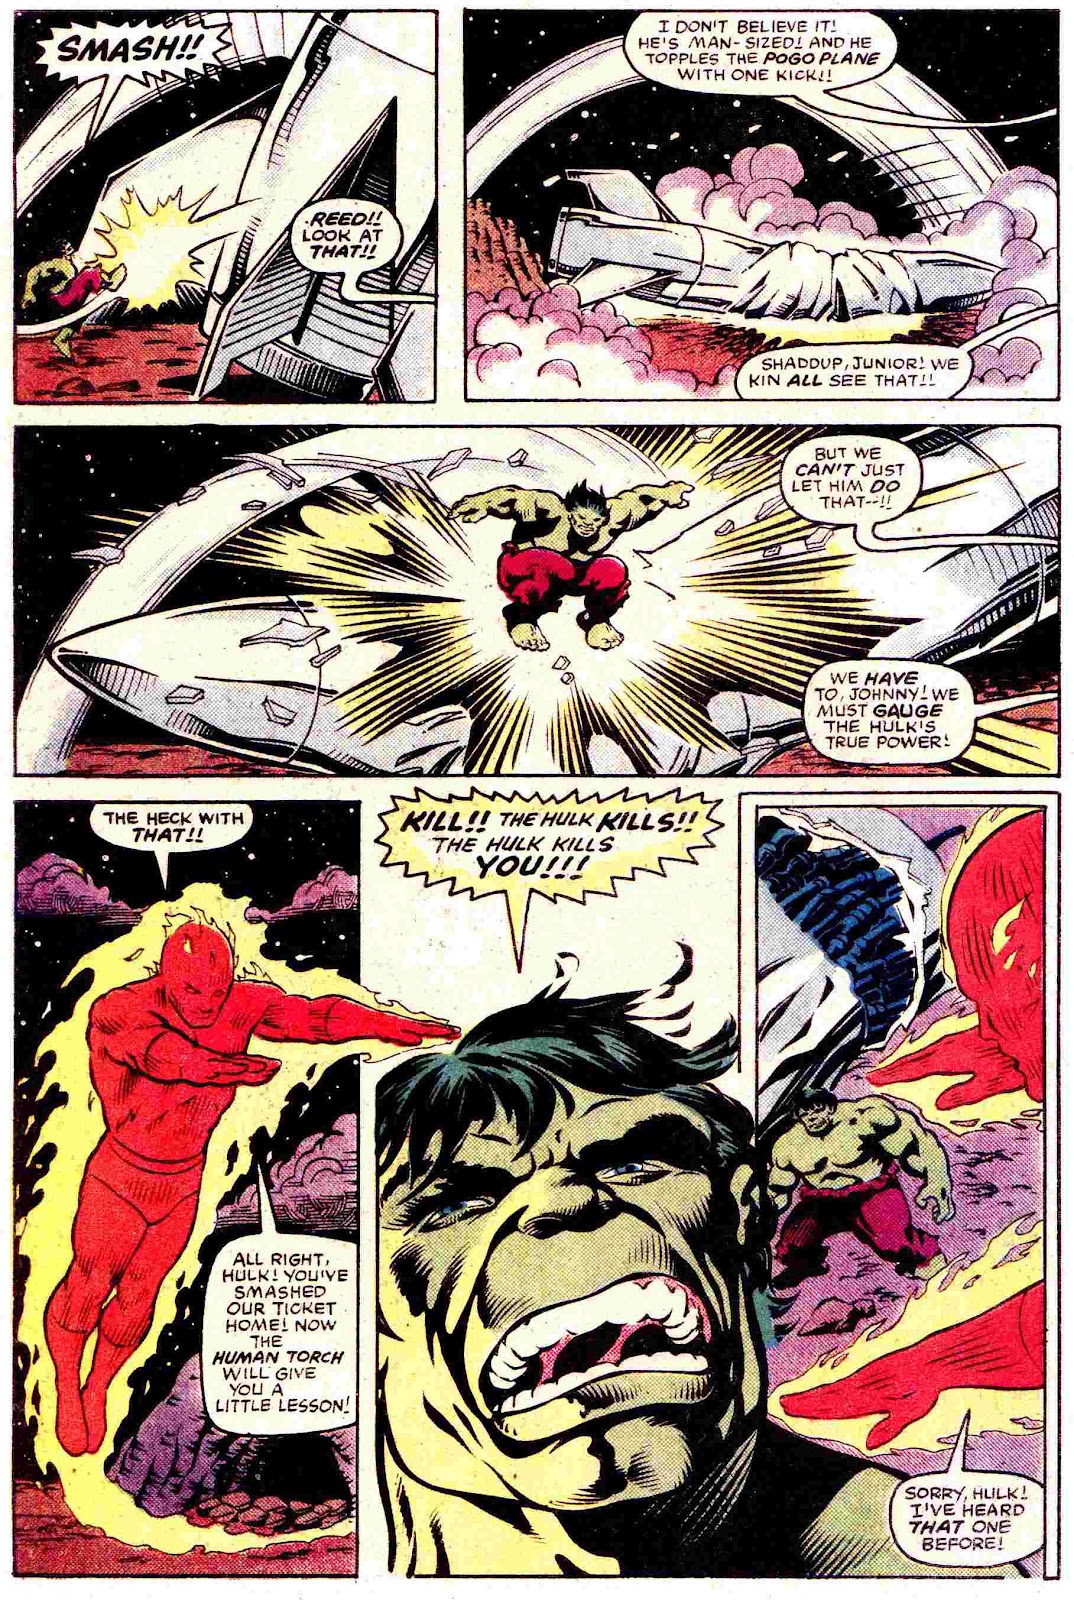 What If? (1977) issue 45 - The Hulk went Berserk - Page 29